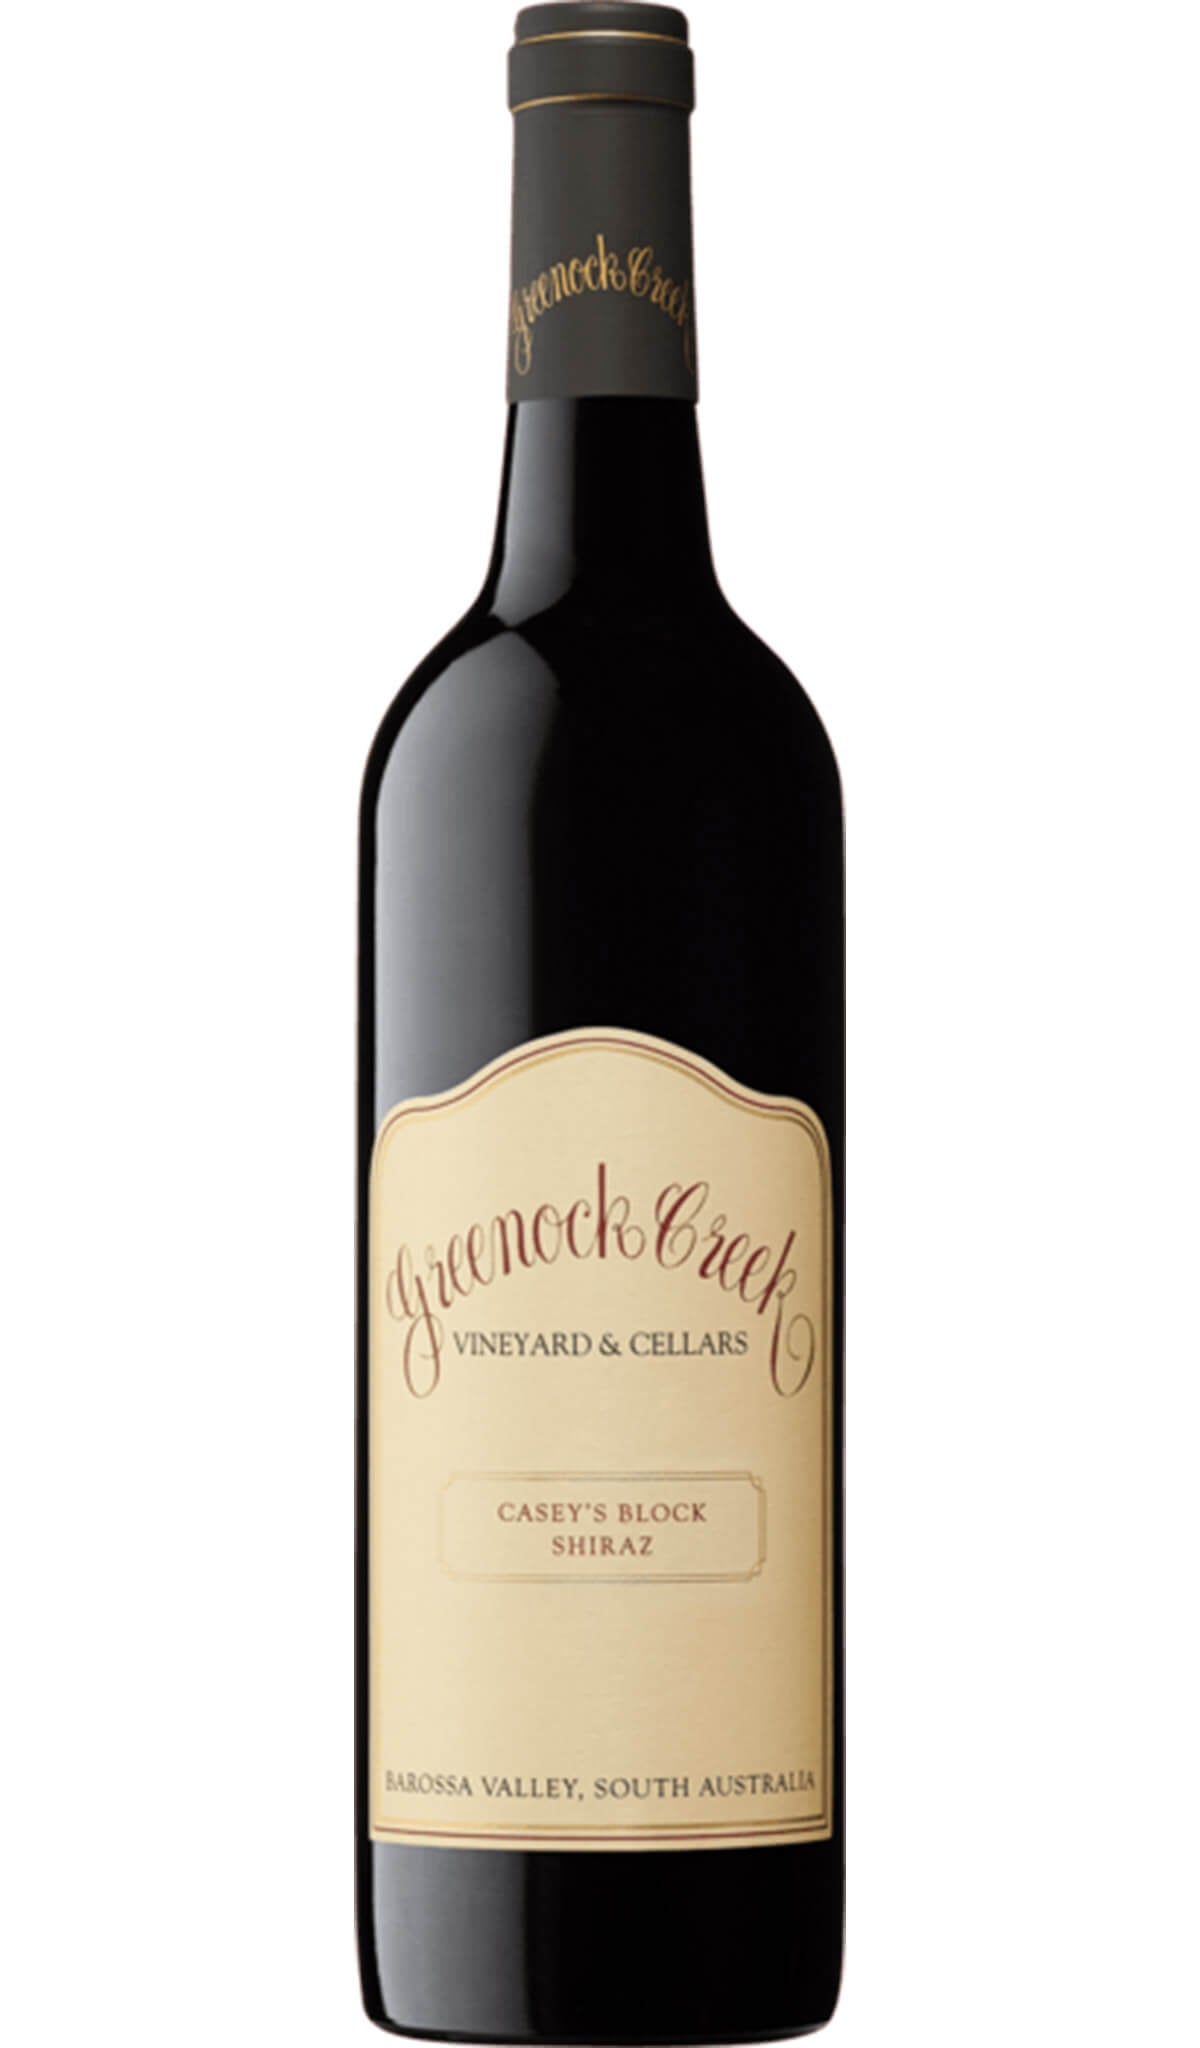 Find out more or buy Greenock Creek Casey's Block Shiraz 2021 (Barossa) online at Wine Sellers Direct - Australia’s independent liquor specialists.